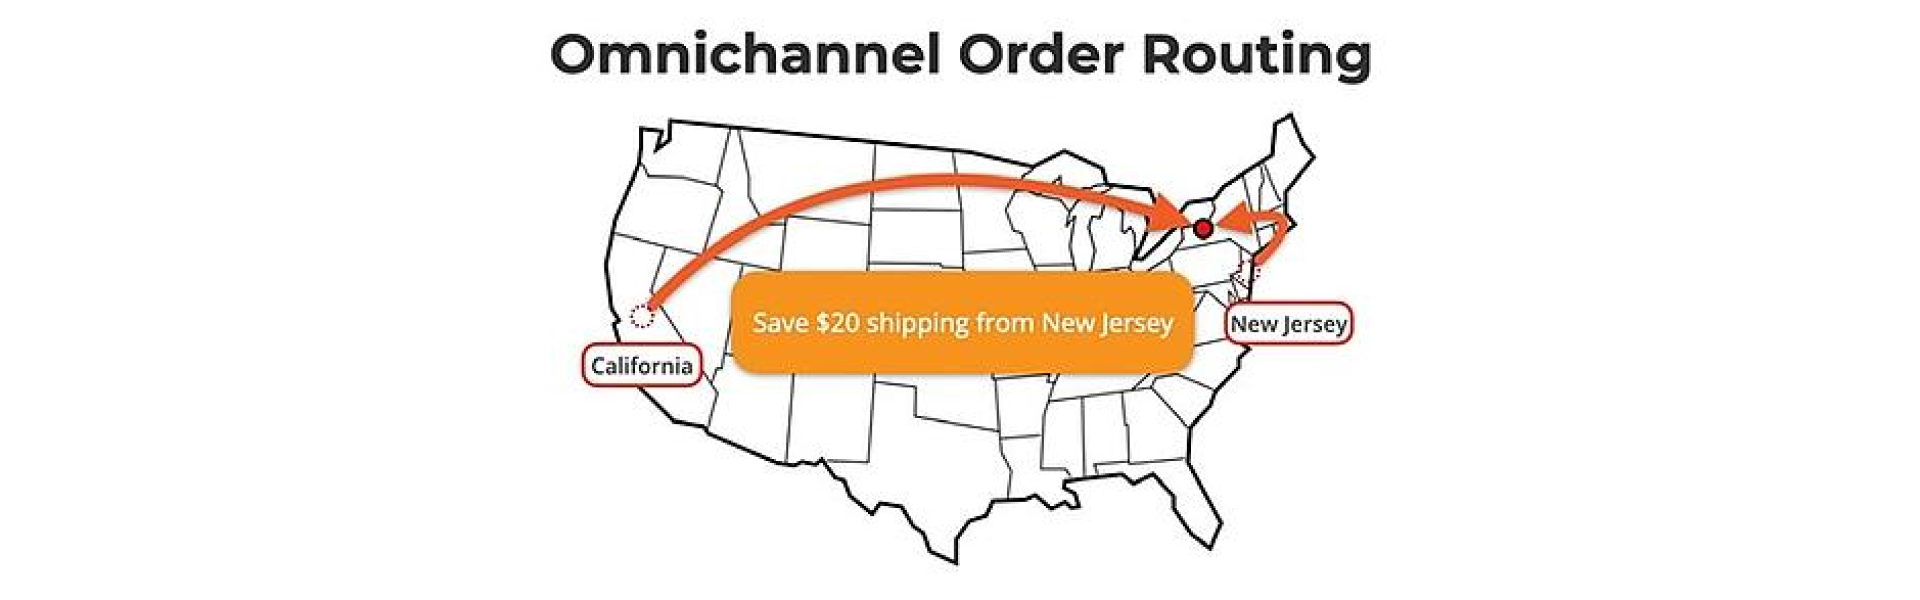 How To Achieve Speedy Delivery With Omnichannel Order Routing